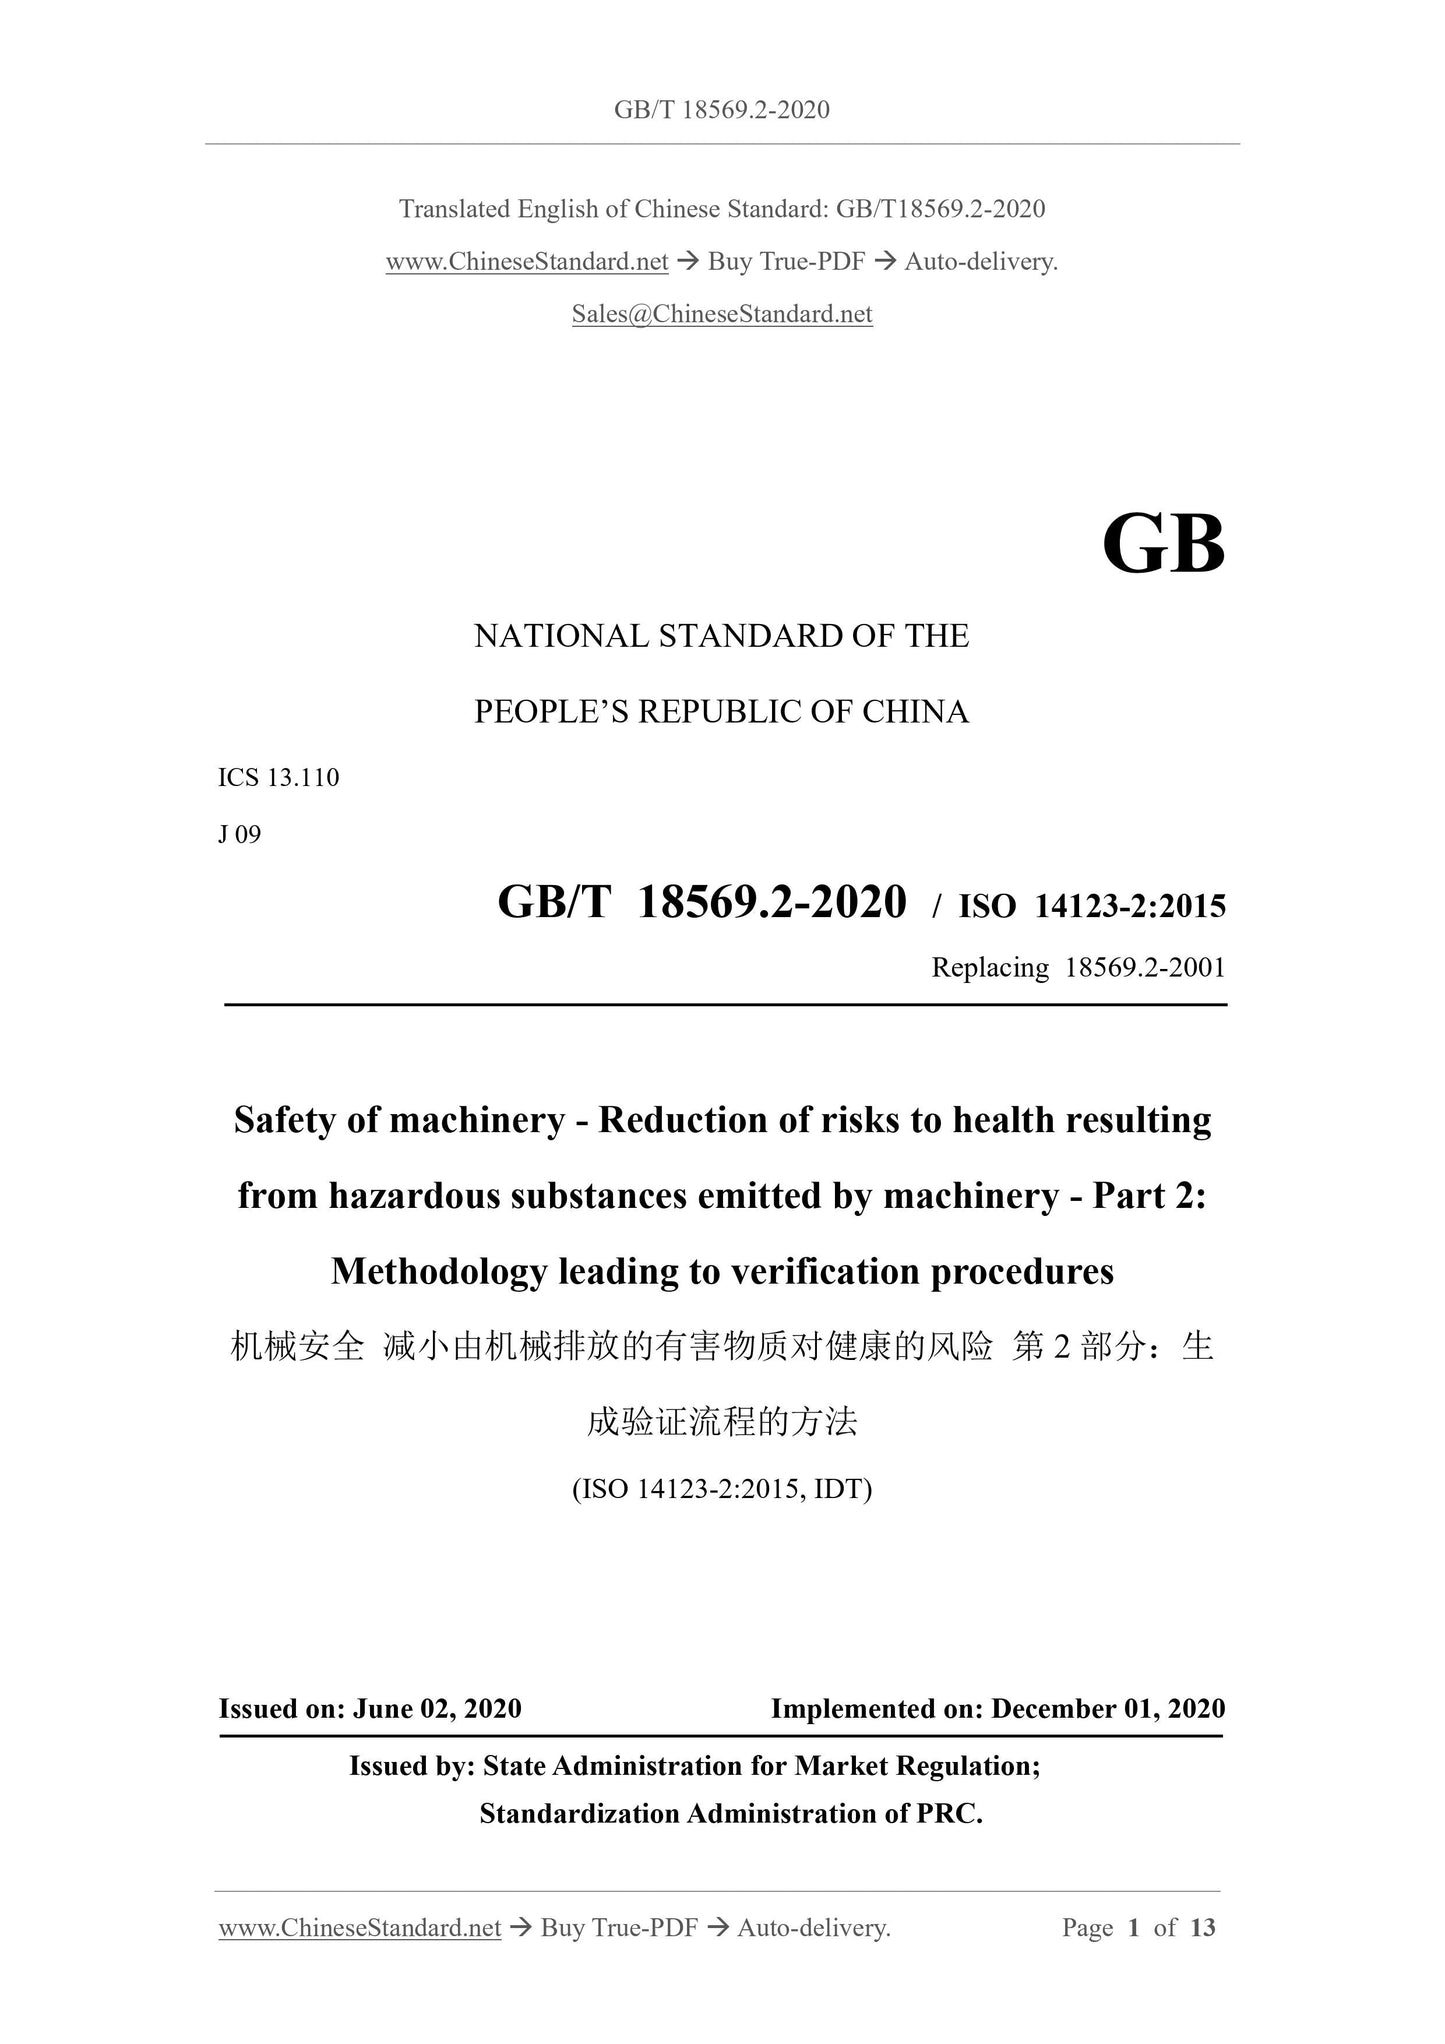 GB/T 18569.2-2020 Page 1